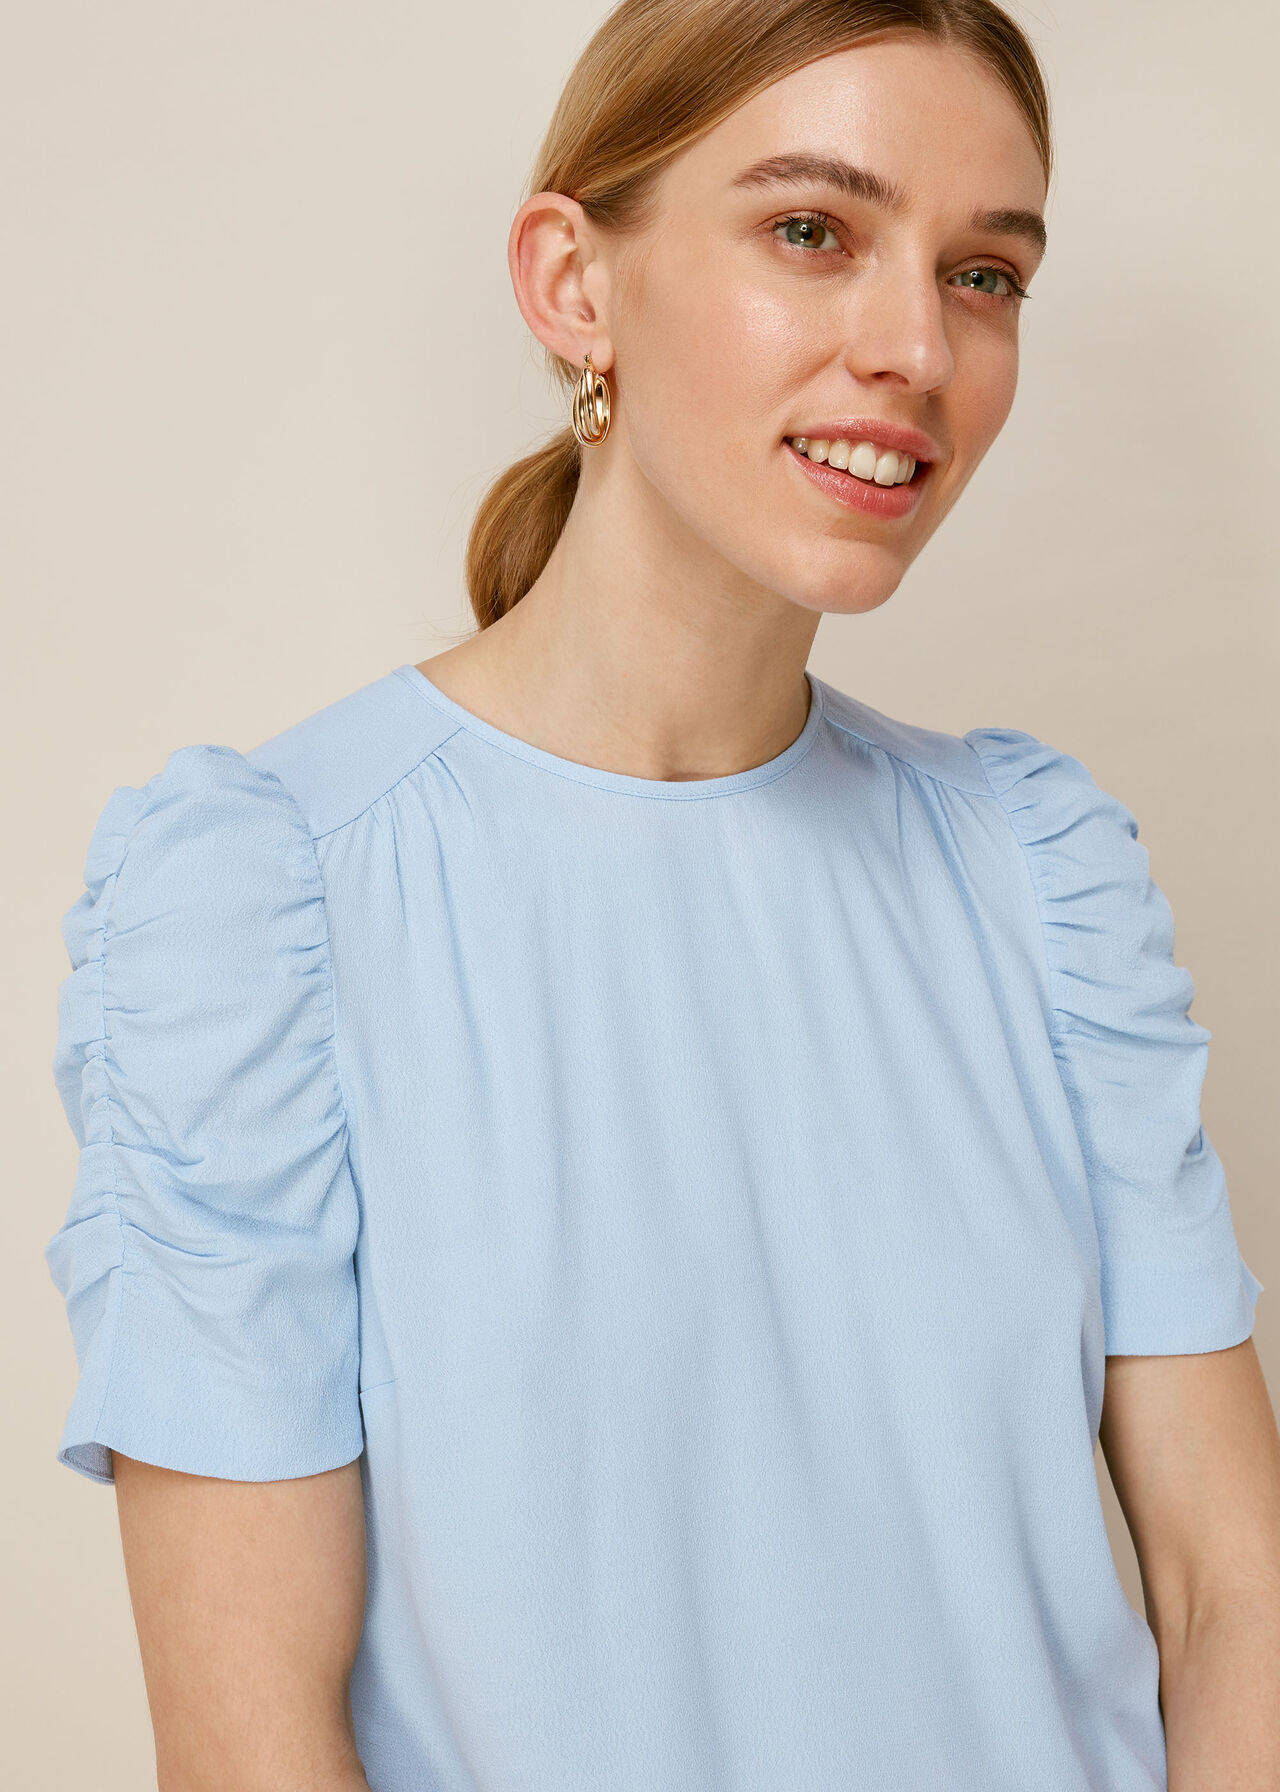 Pale Nelly Top | WHISTLES Whistles